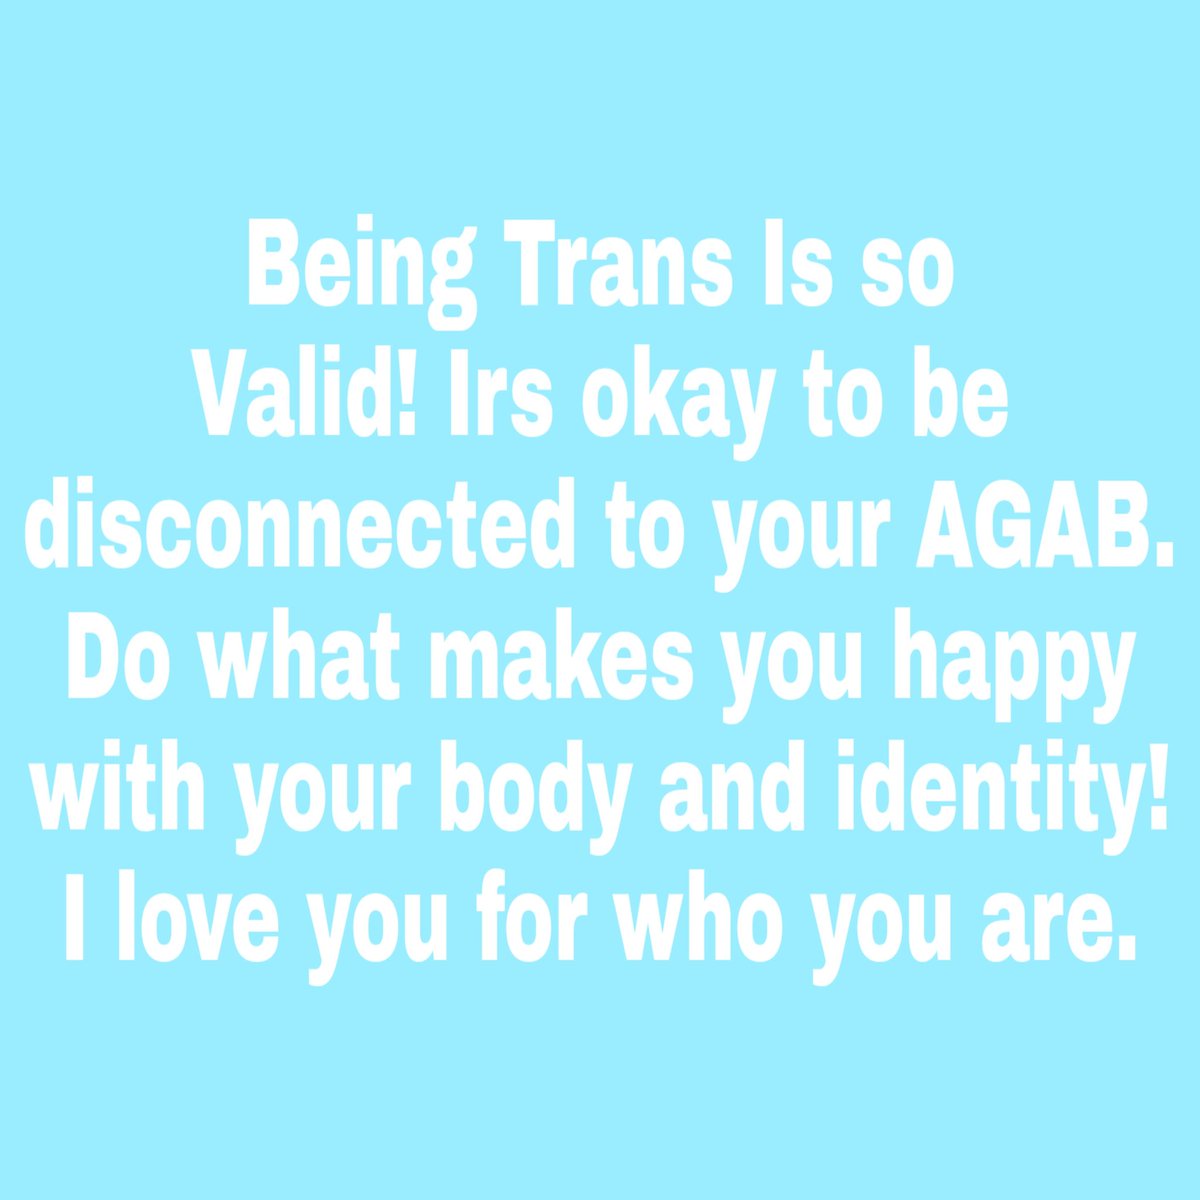  #MELTO: Trans people are Valid!